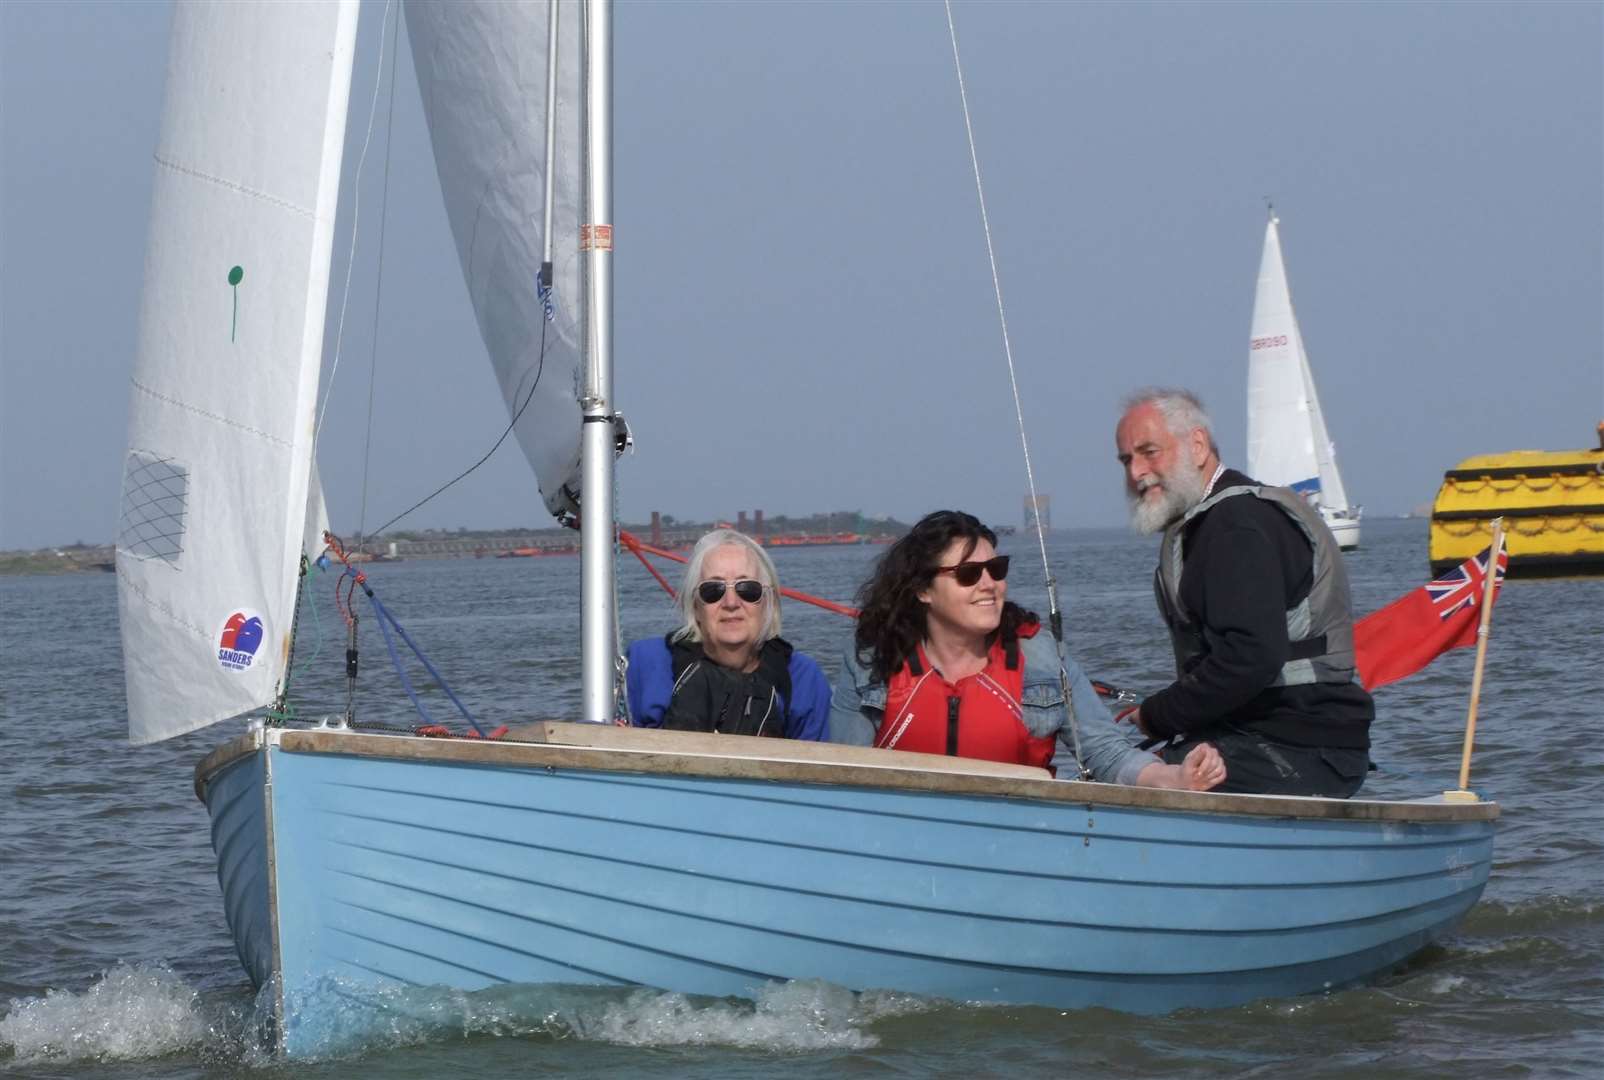 The mayoress of Gravesham, Julie Easy, spending time on the waves at Gravesend Sailing Club's sail-past.